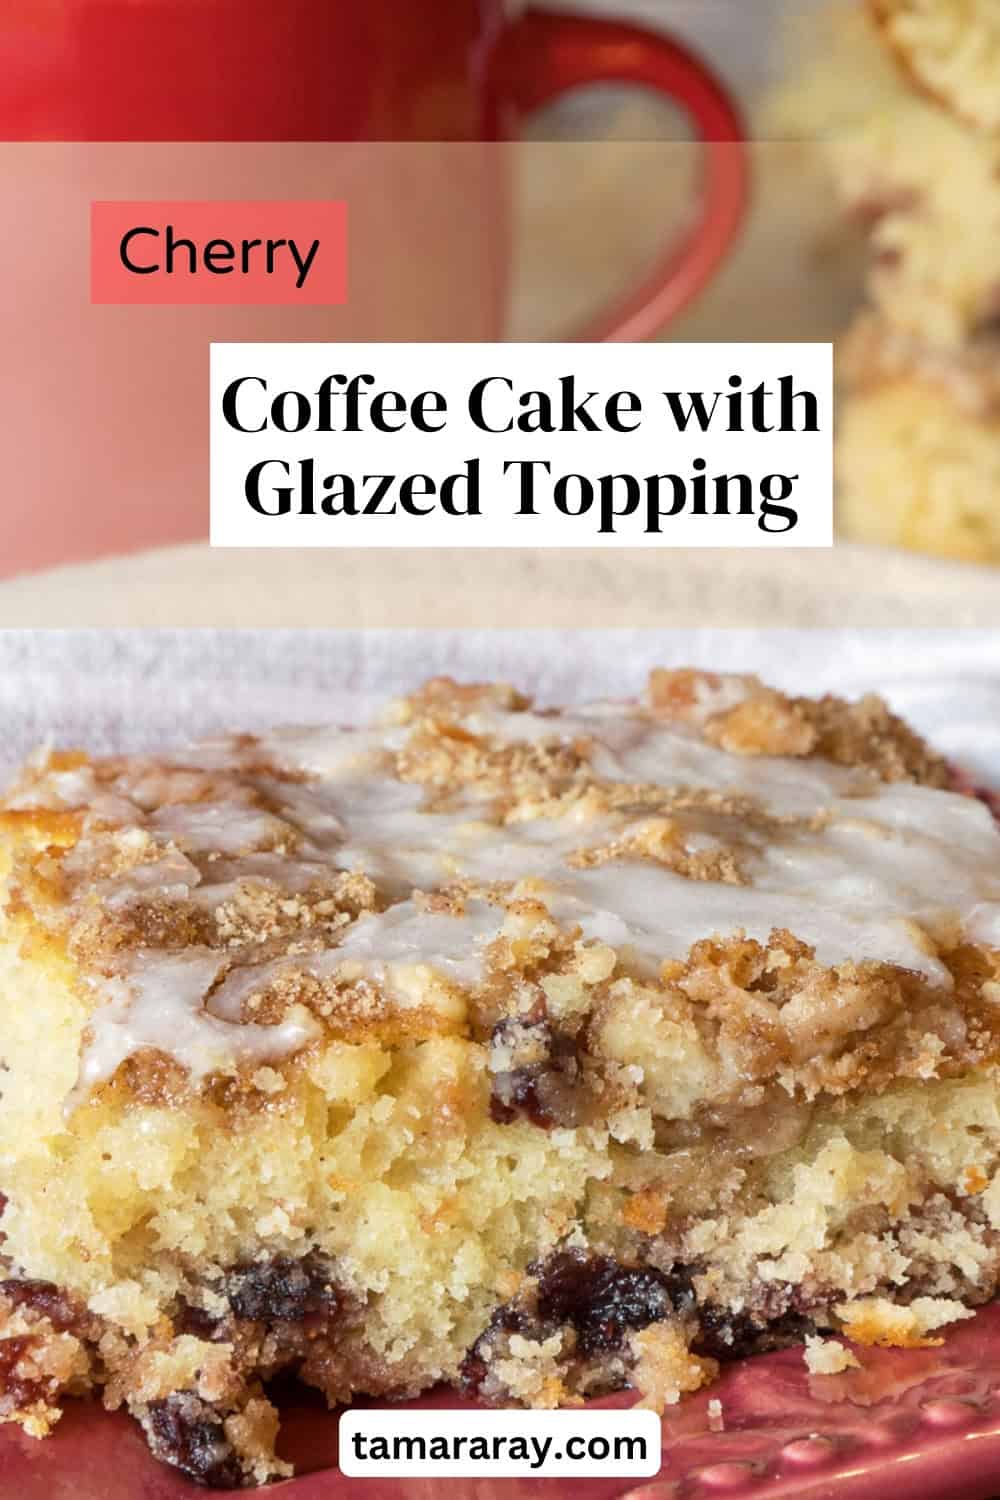 Cherry coffee cake with glaze topping.